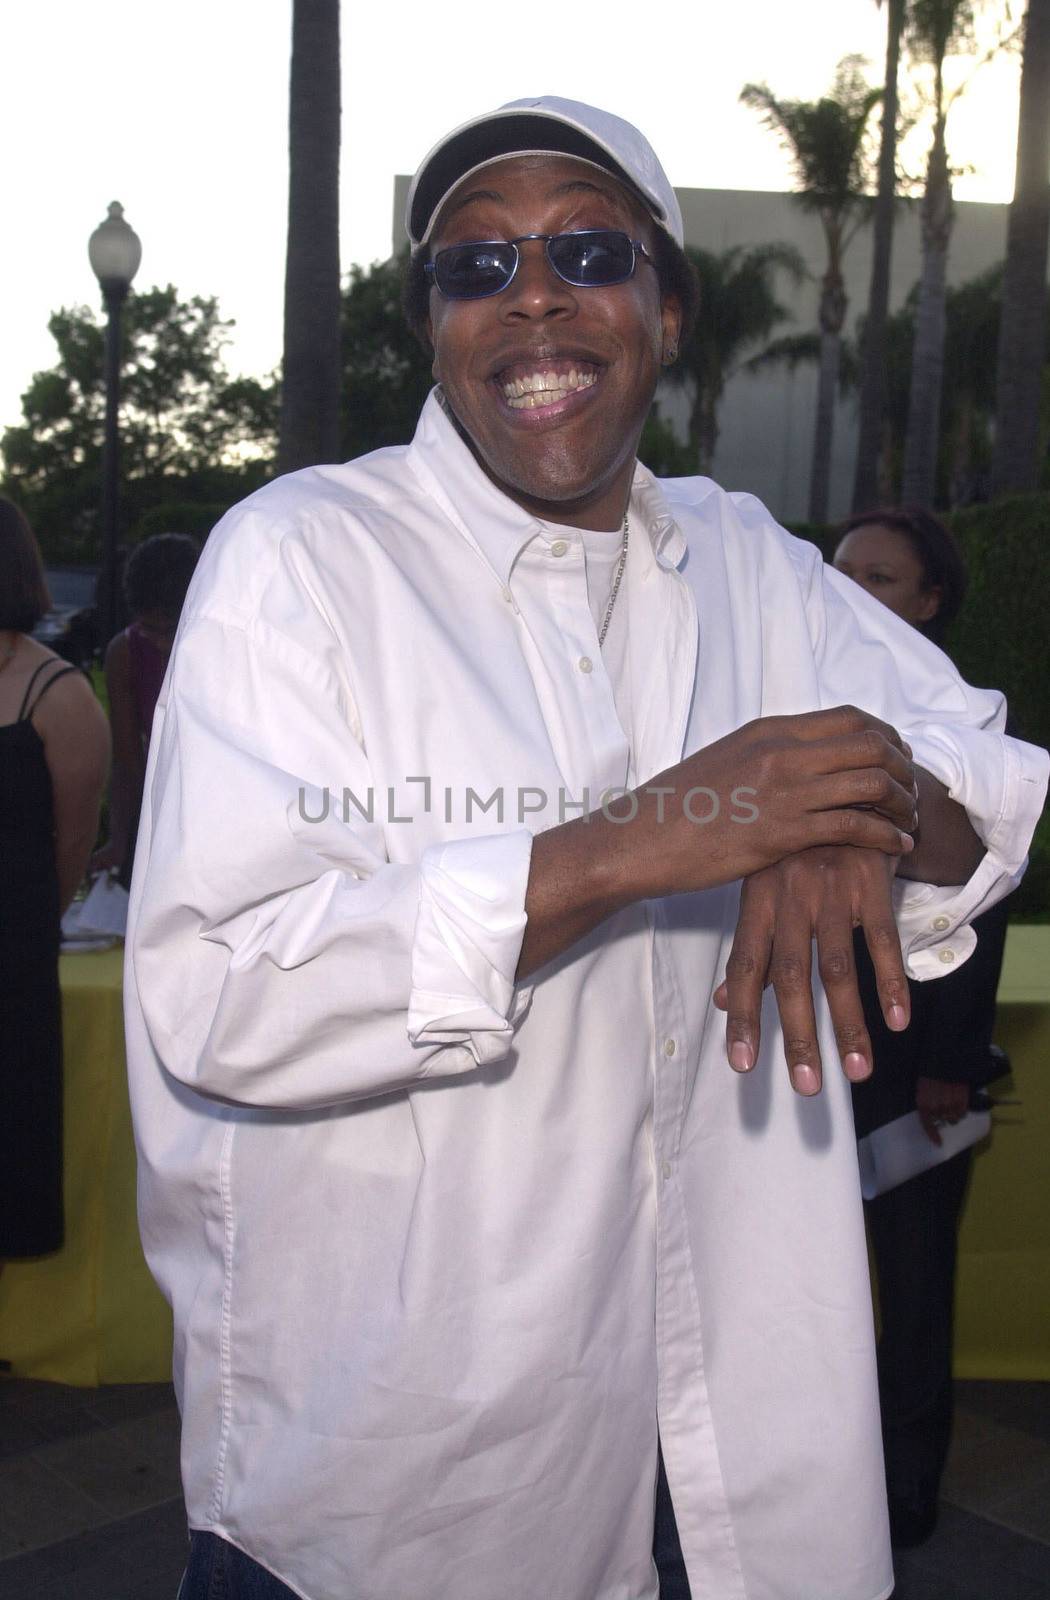 Arsenio Hall at the premiere of "Original Kings of Comedy" in Hollywood. 08-10-00